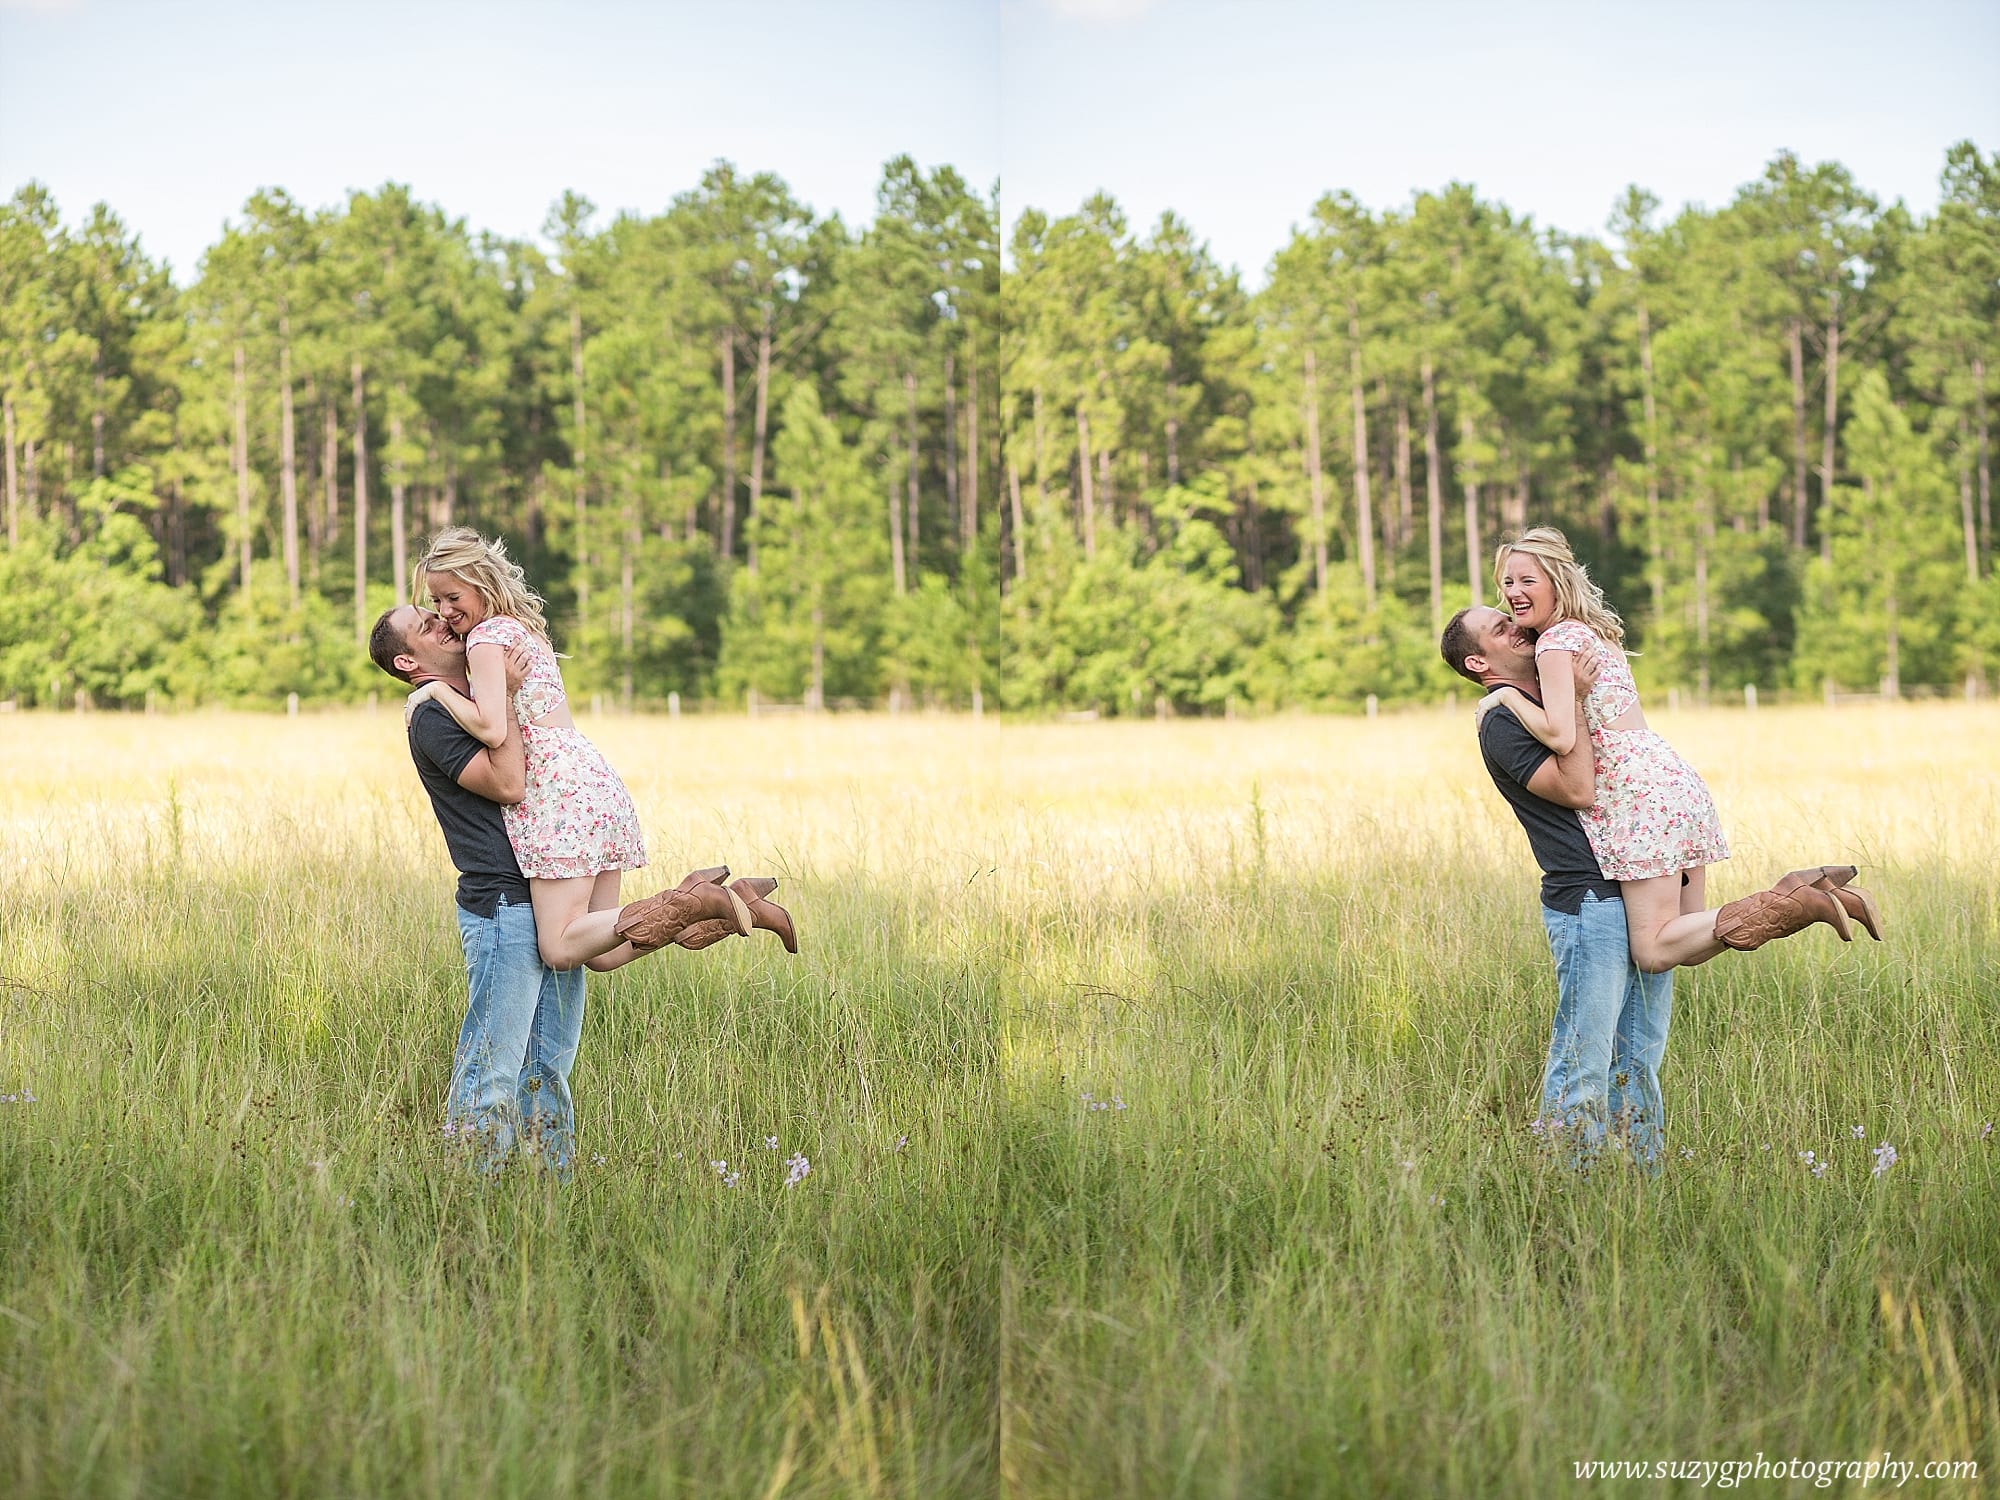 engagements-new orleans-texas-baton rouge-lake charles-suzy g-photography-suzygphotography_0009